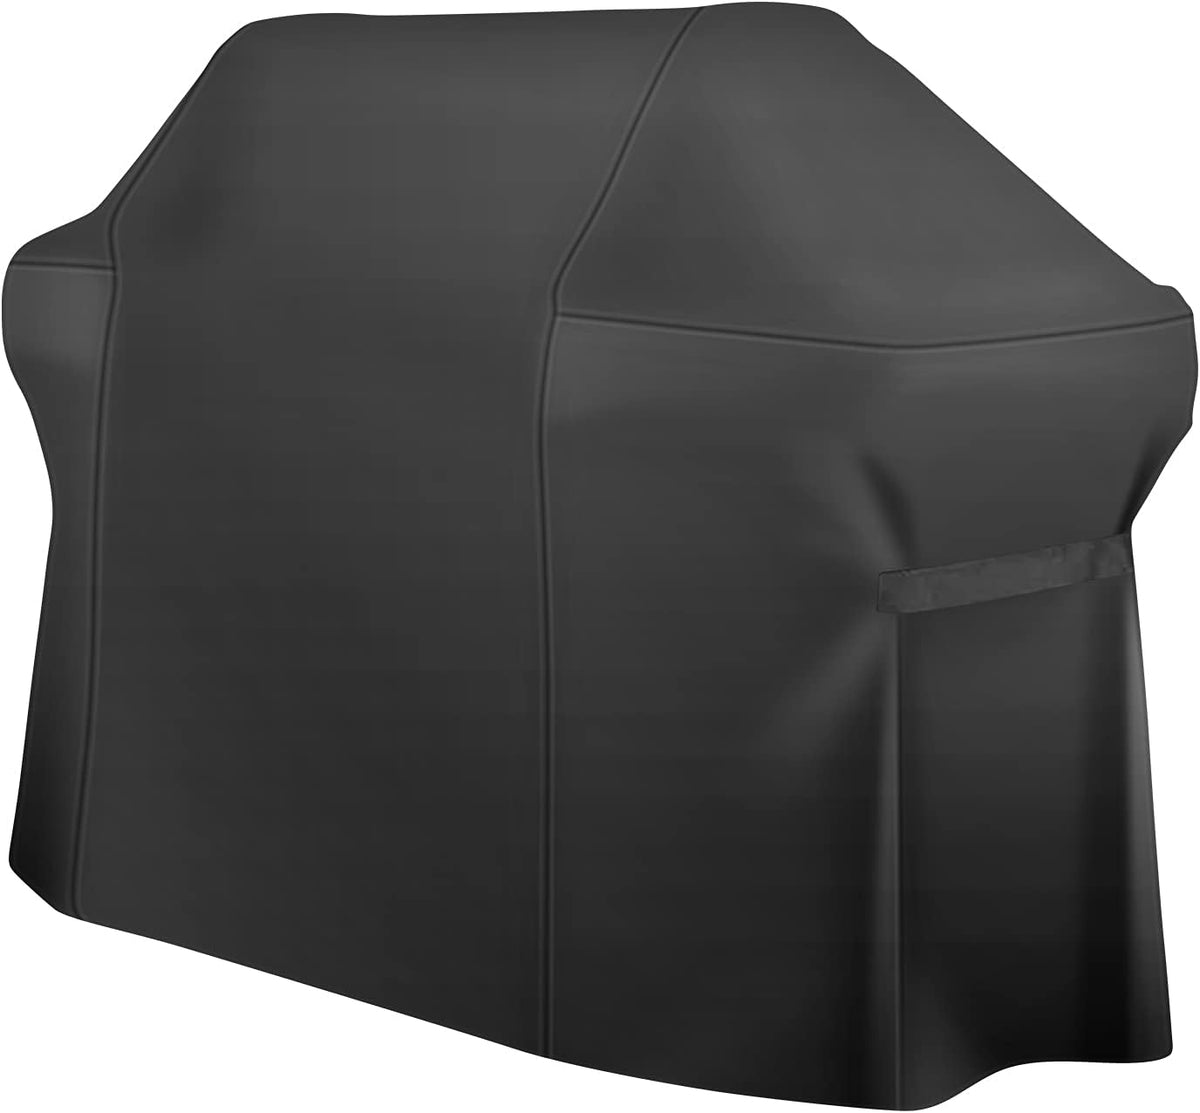 7758 Grill Cover for Weber Genesis 4 Burner Gas Grills made at